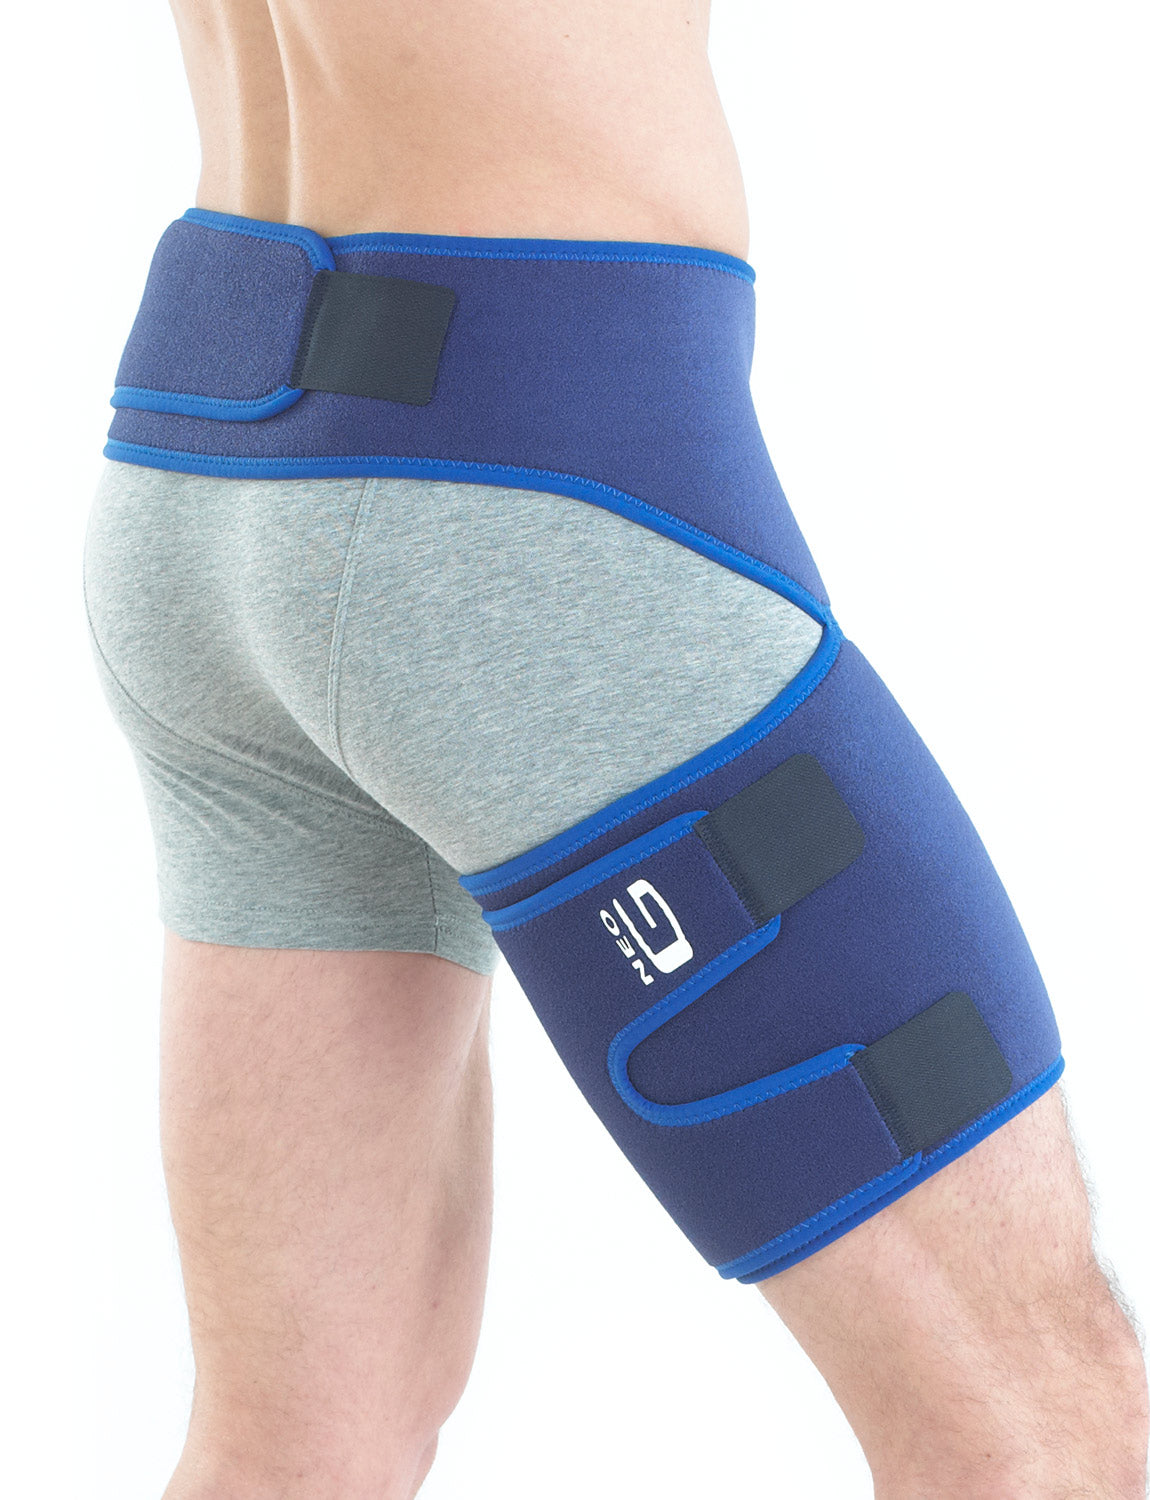 Hamstring Compression Sleeve Recovery Support – Non-Slip Groin Wrap for  Adductor Tendonitis, Strain, Stiffness, Inflammation - Thigh Compression